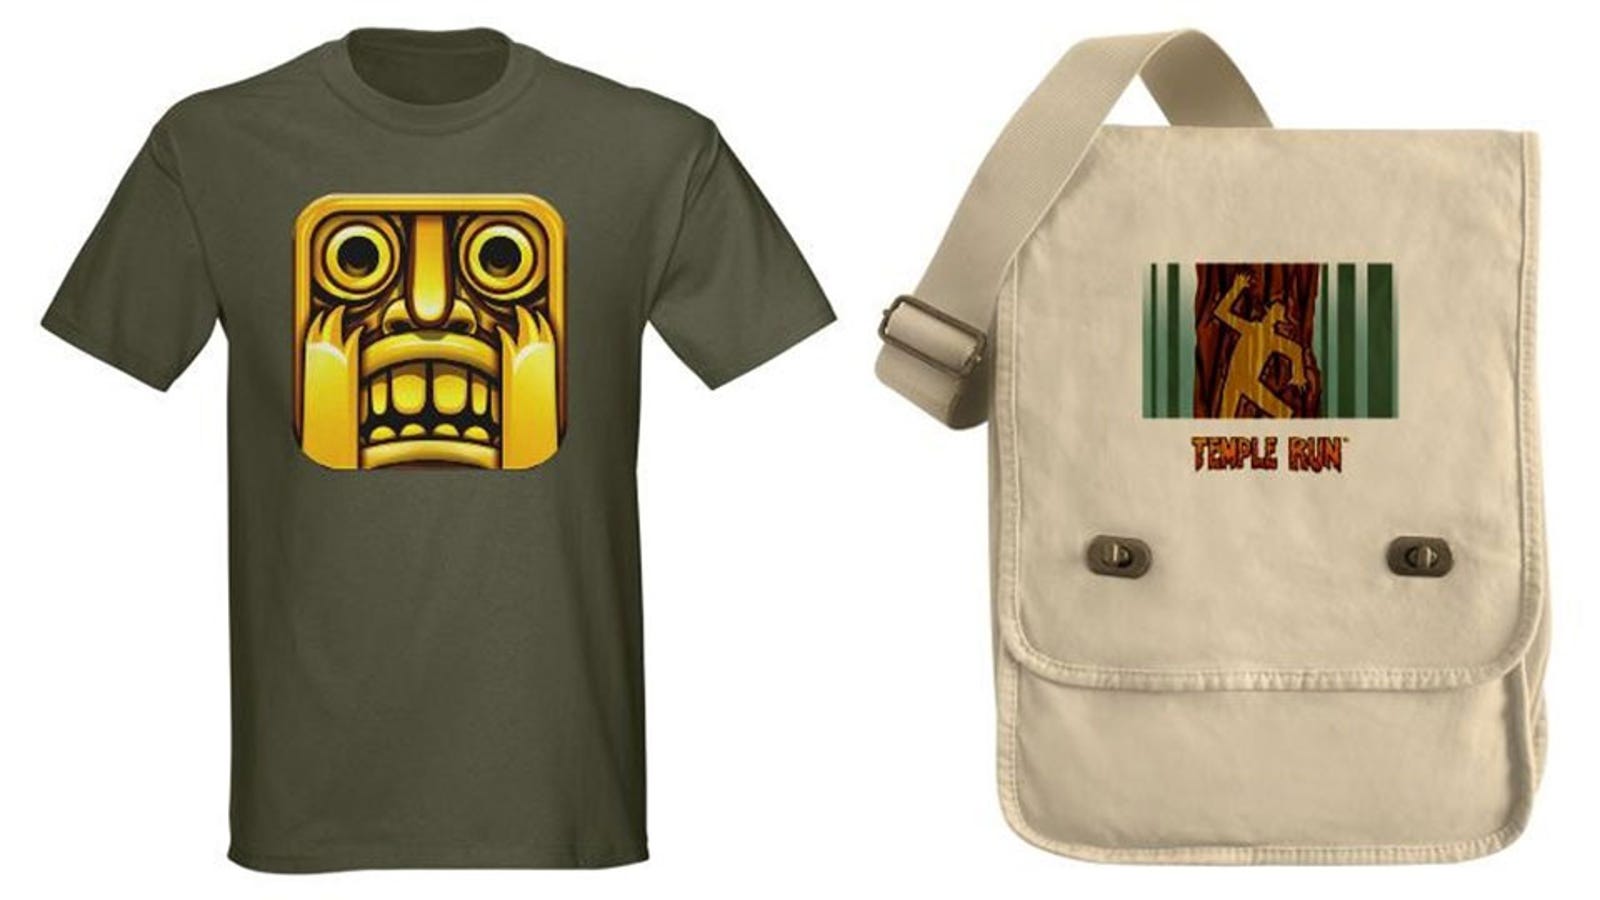 There is Now an Official Temple Run Store. It Sells All the Temple Run